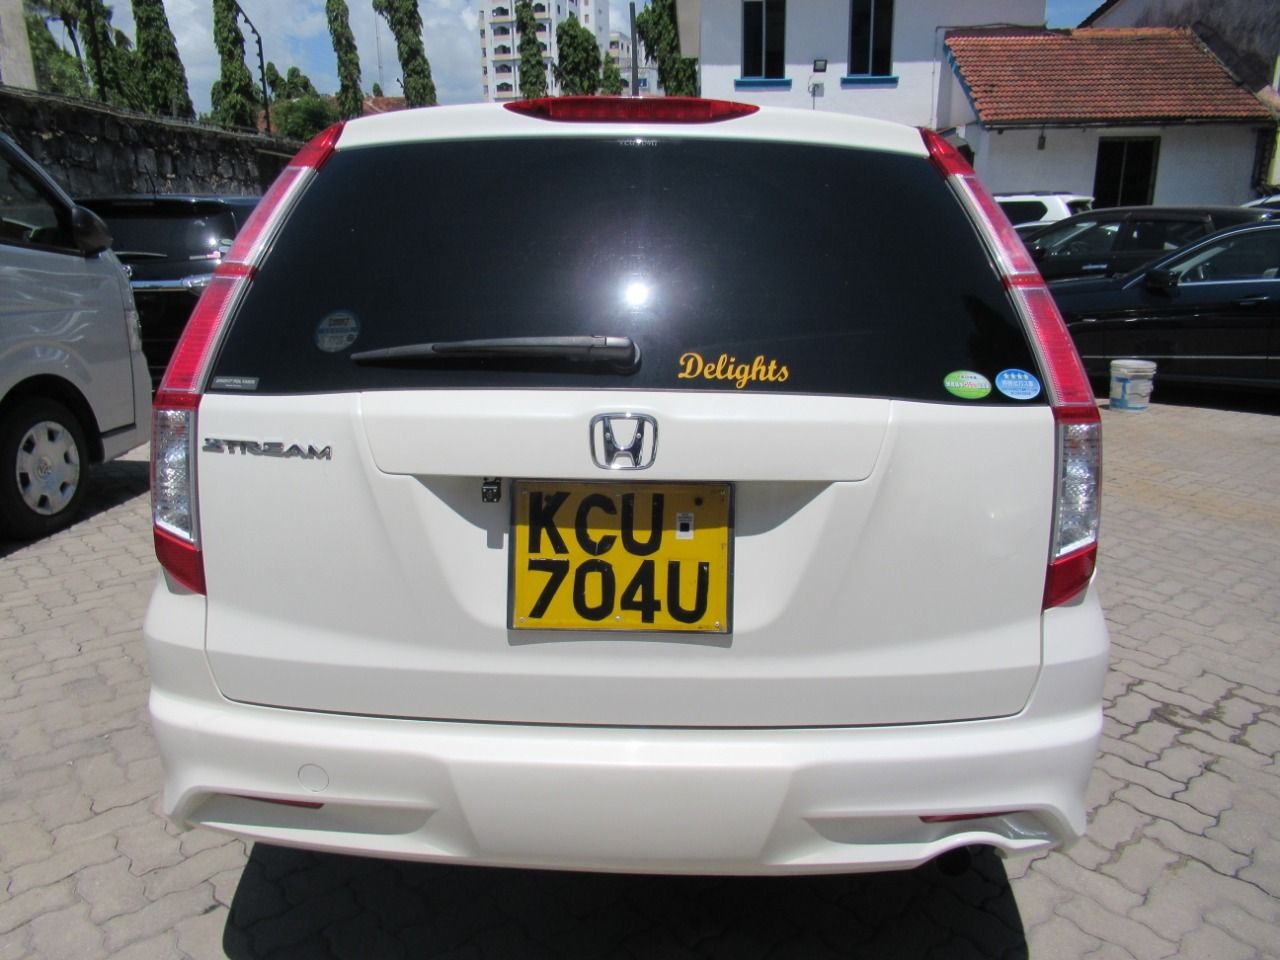 Cars For Sale In Kenya On Hire Purchase - Edukasi News